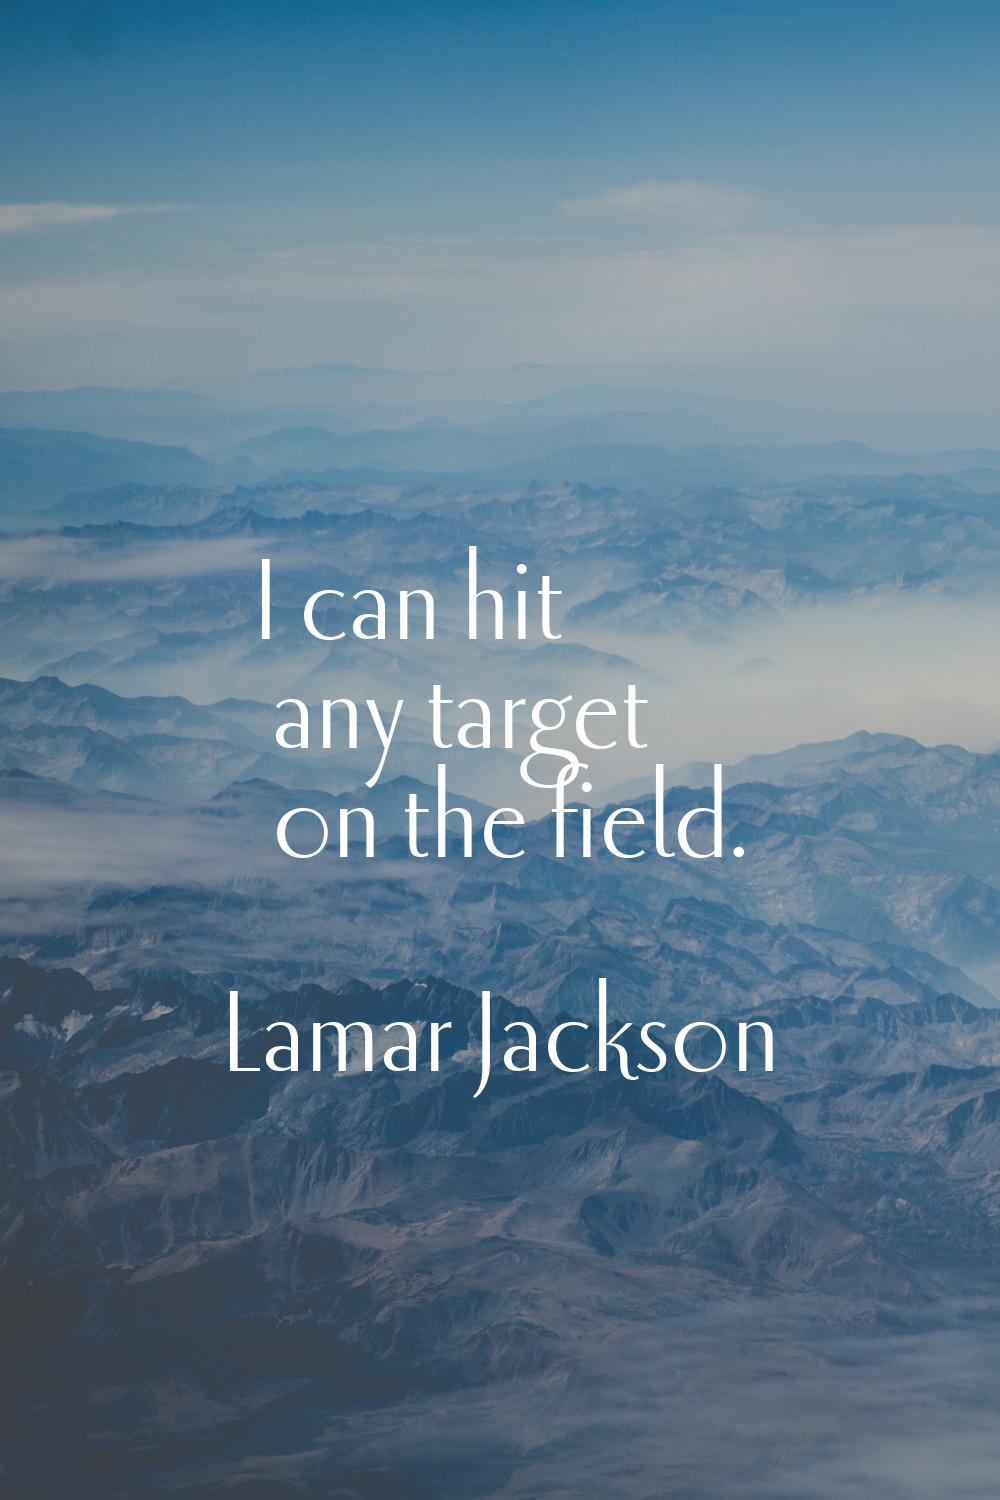 I can hit any target on the field.